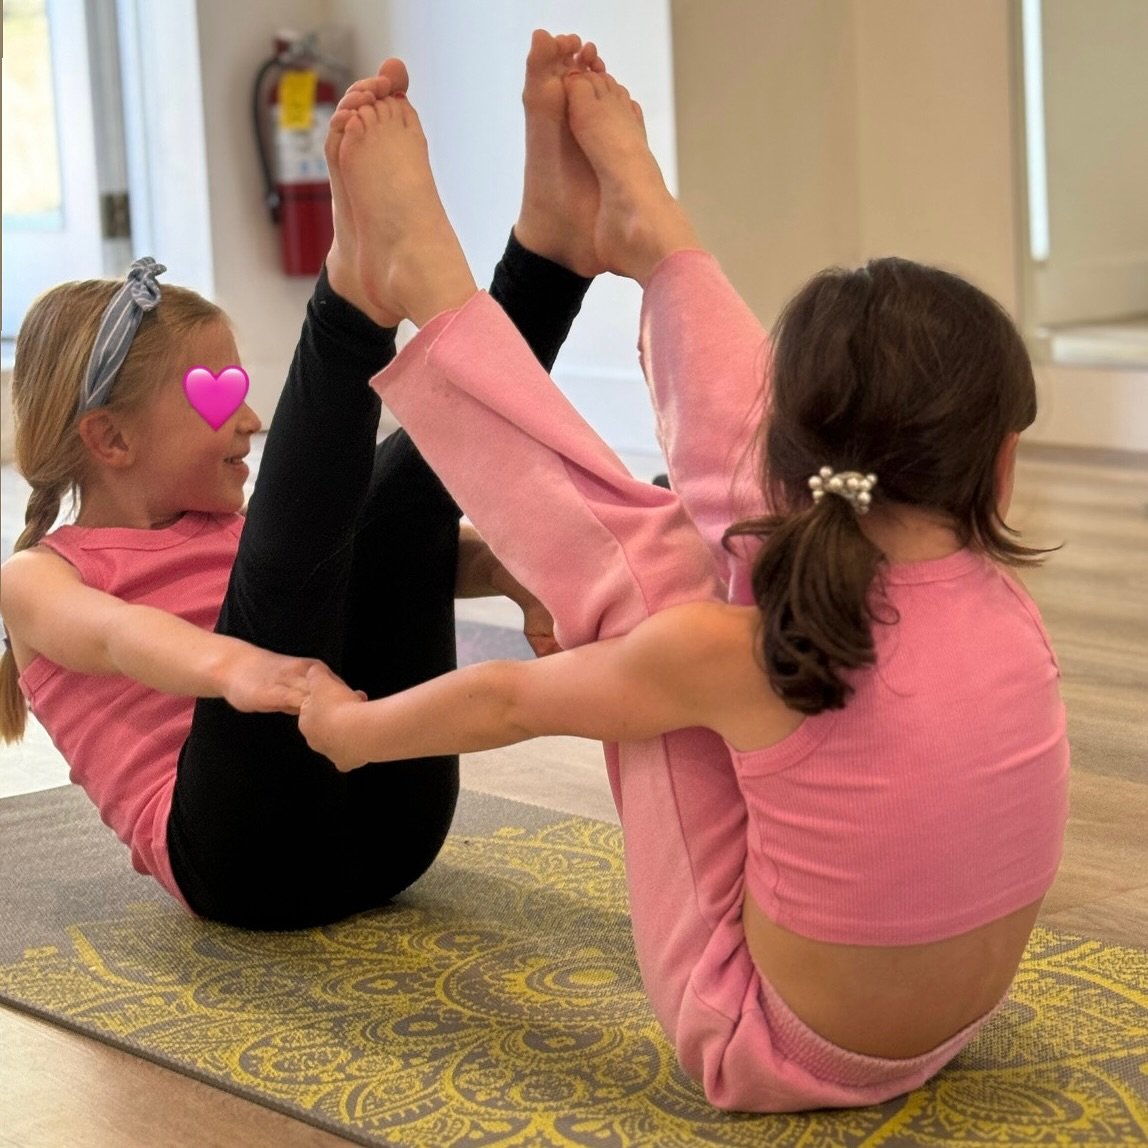 Our next Kids Yoga session starts THIS THURSDAY May 2nd at 4 pm for kids K-3rd grade. 

The benefits of yoga for kids are incredible:
- teaches emotional regulation and stress management
- boosts self esteem 
- increases focus and attention
- promote